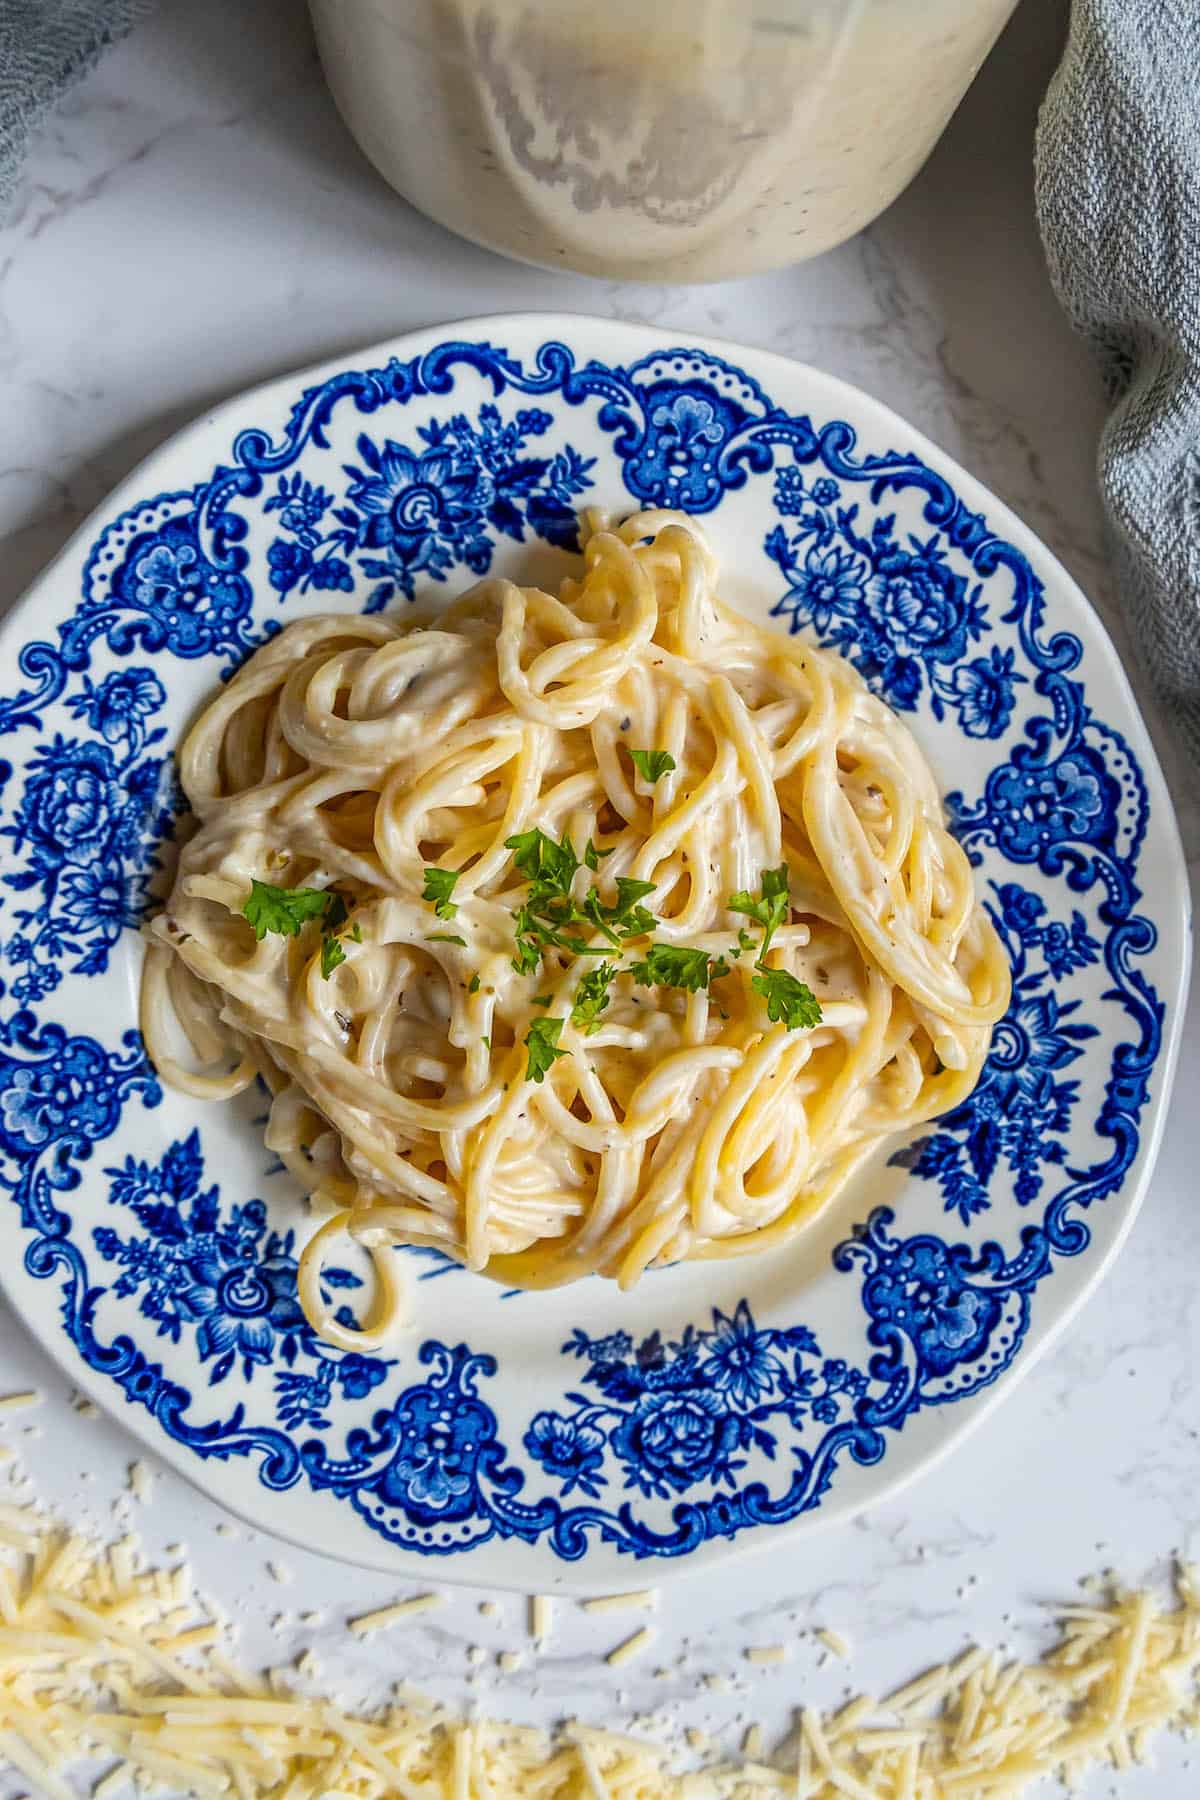 A blue and white plate with pasta topped with parmesan cheese.